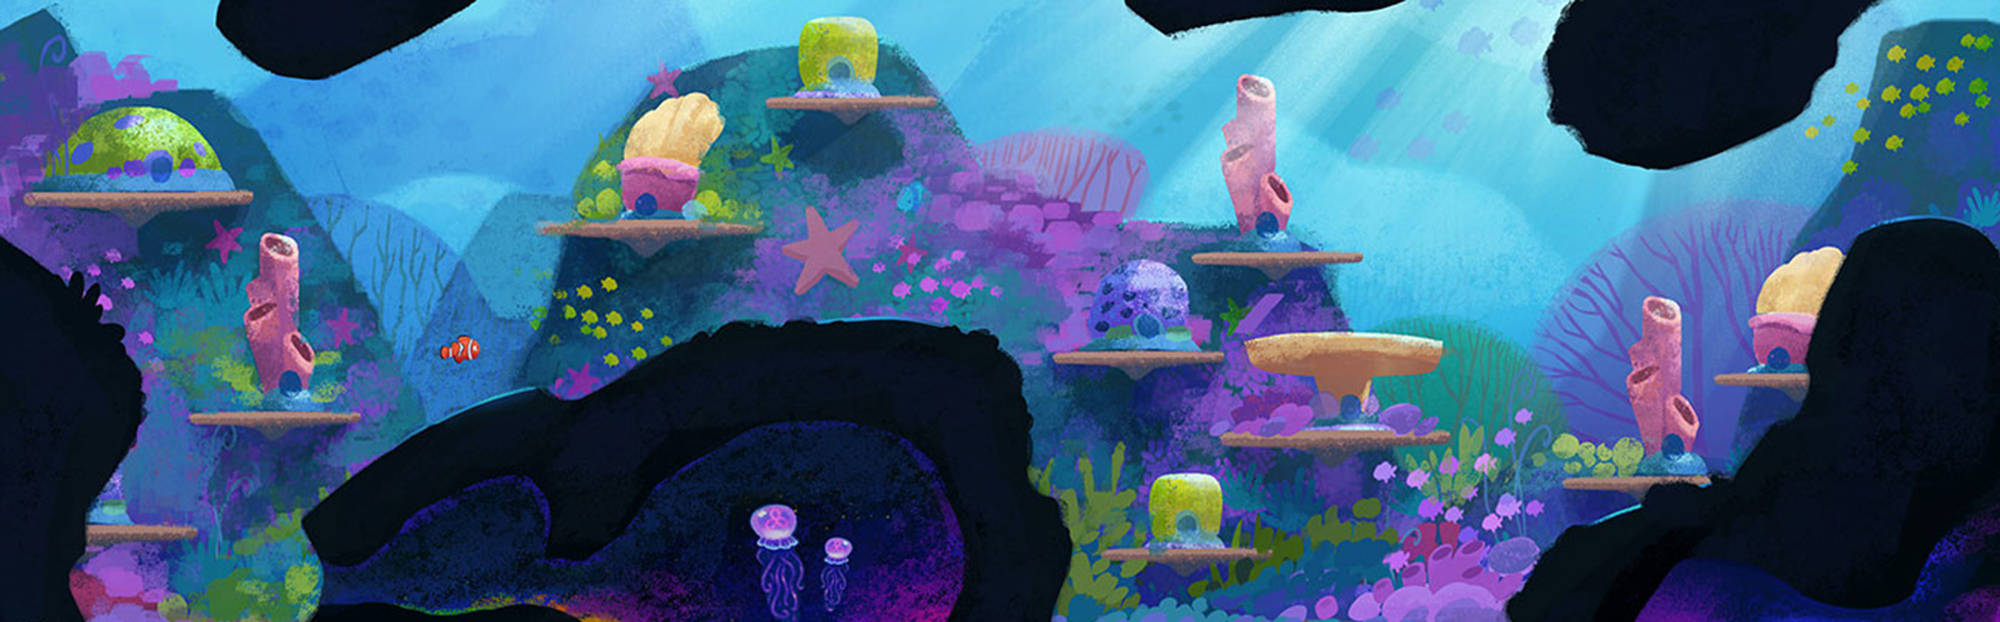 Finding Dory 2d Coral Concept Art